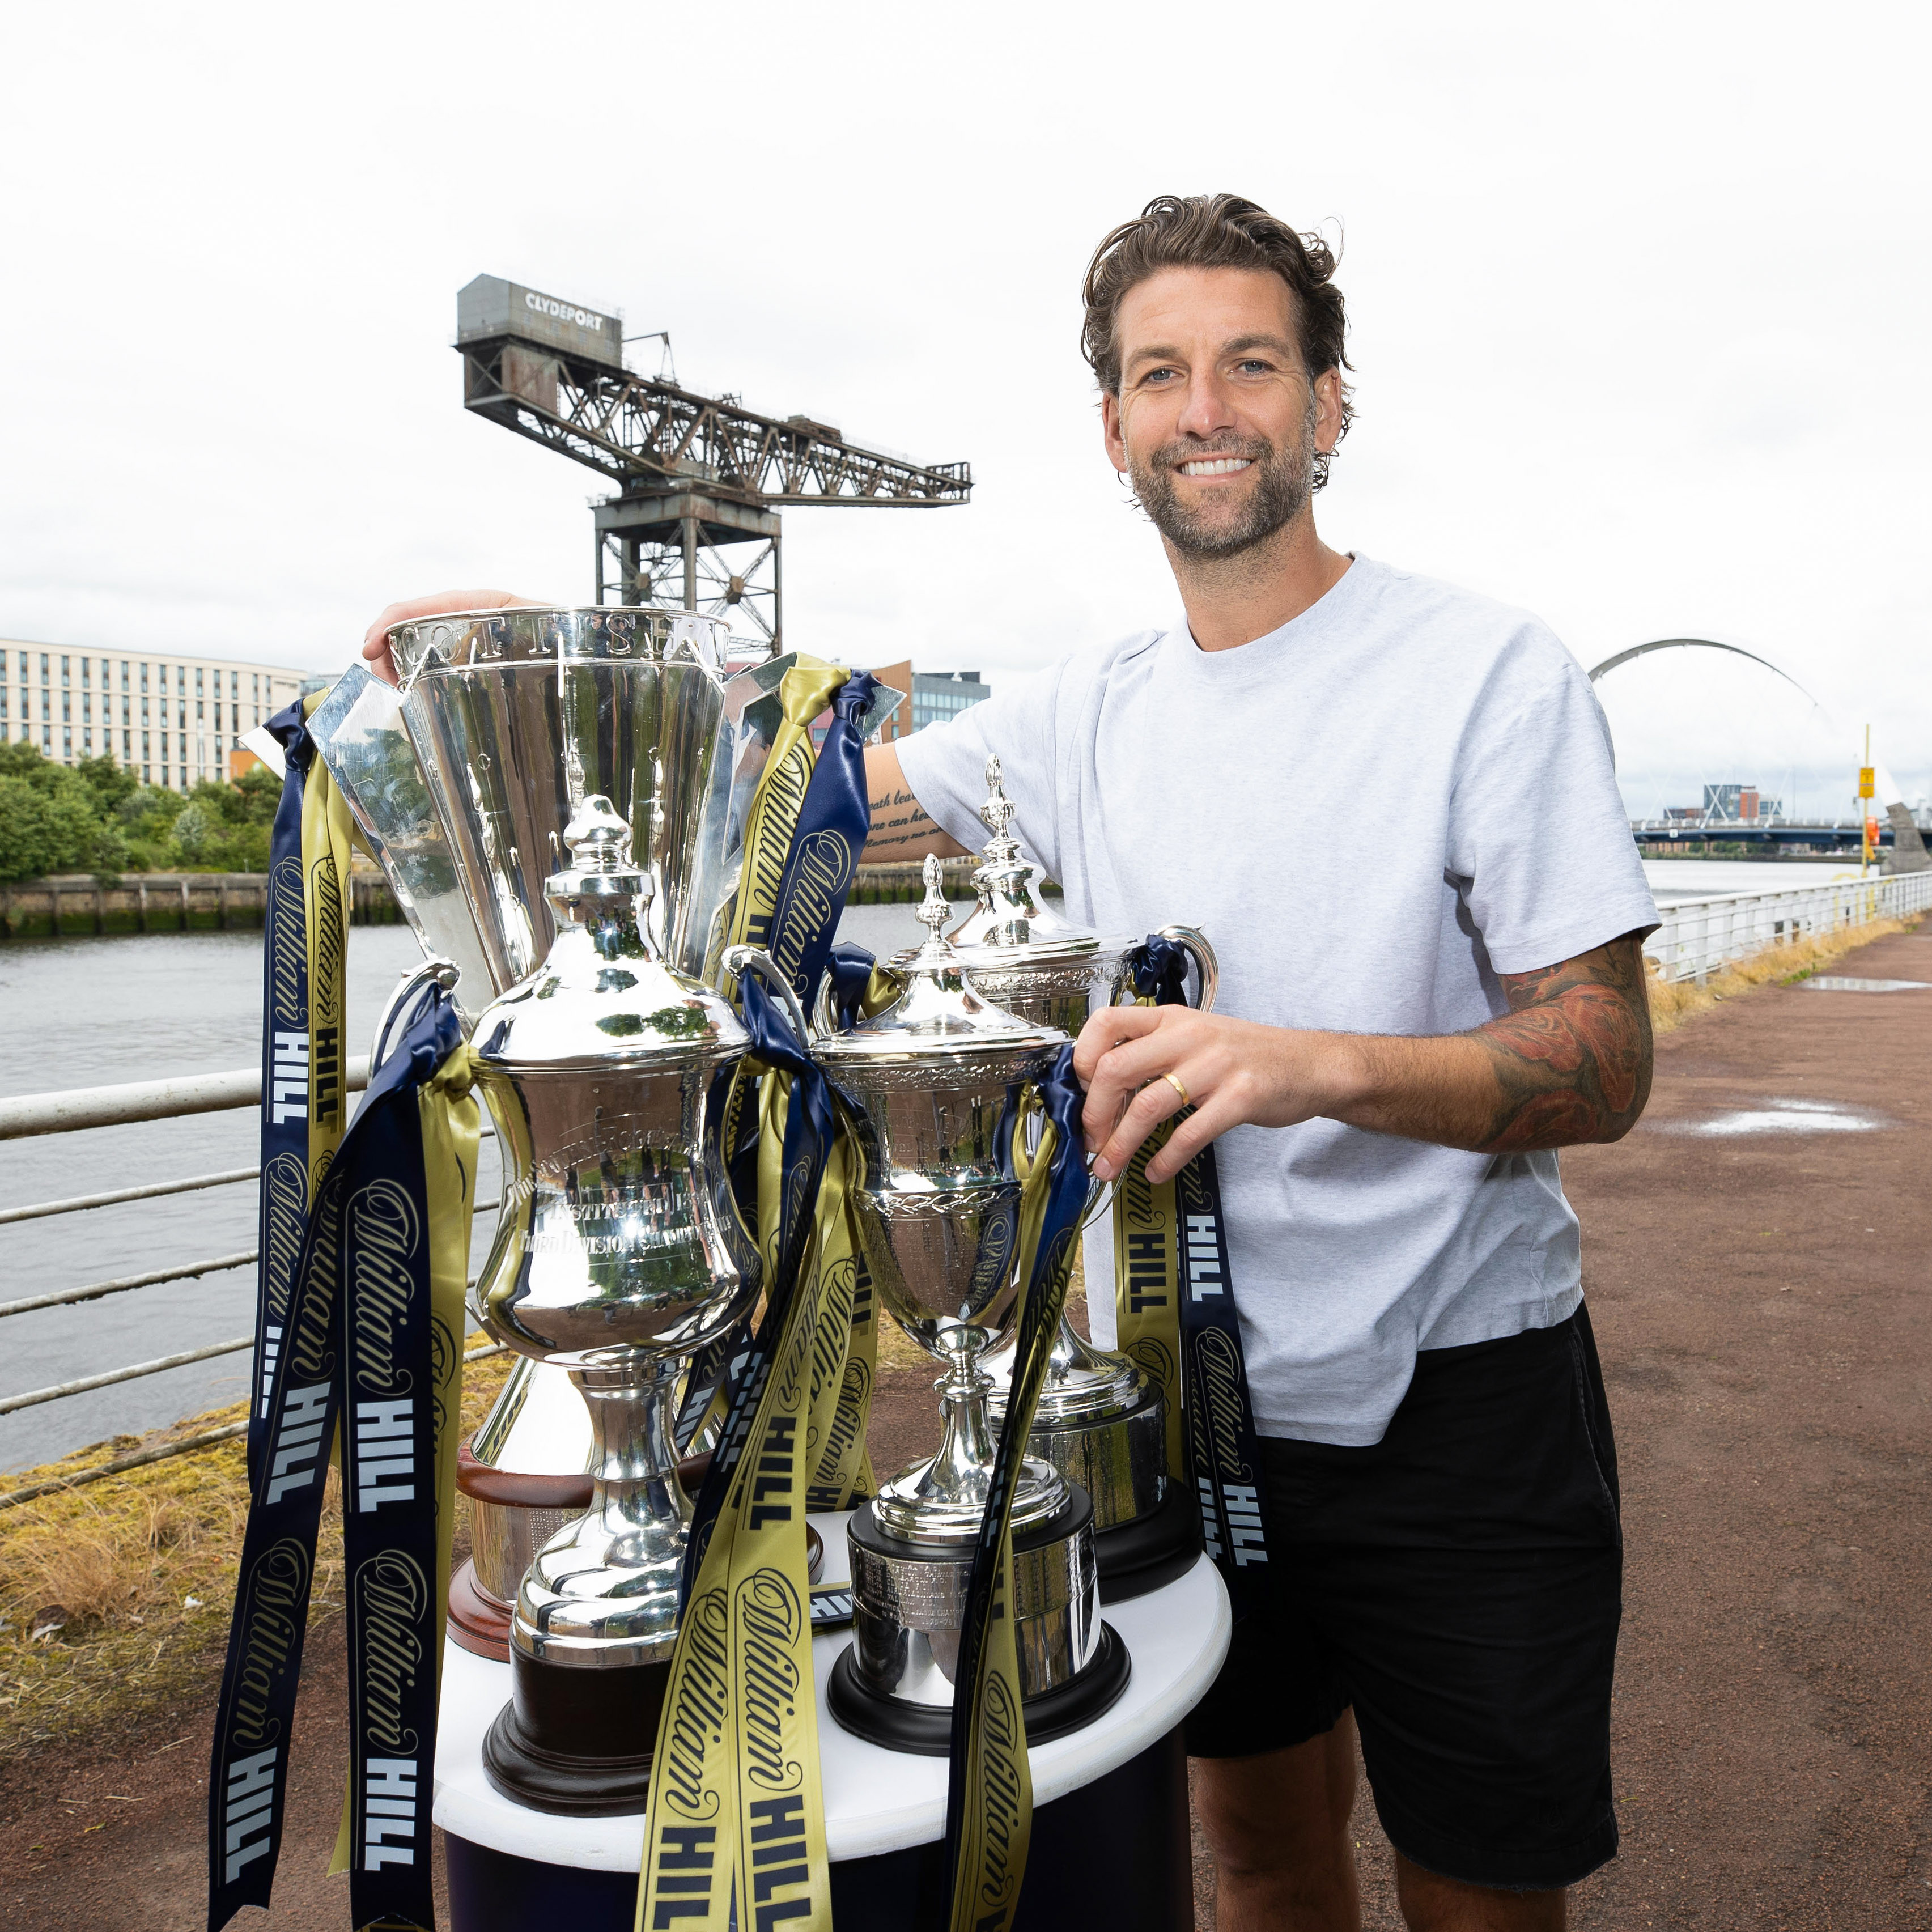 Charlie Mulgrew with the William Hill SPFL trophies